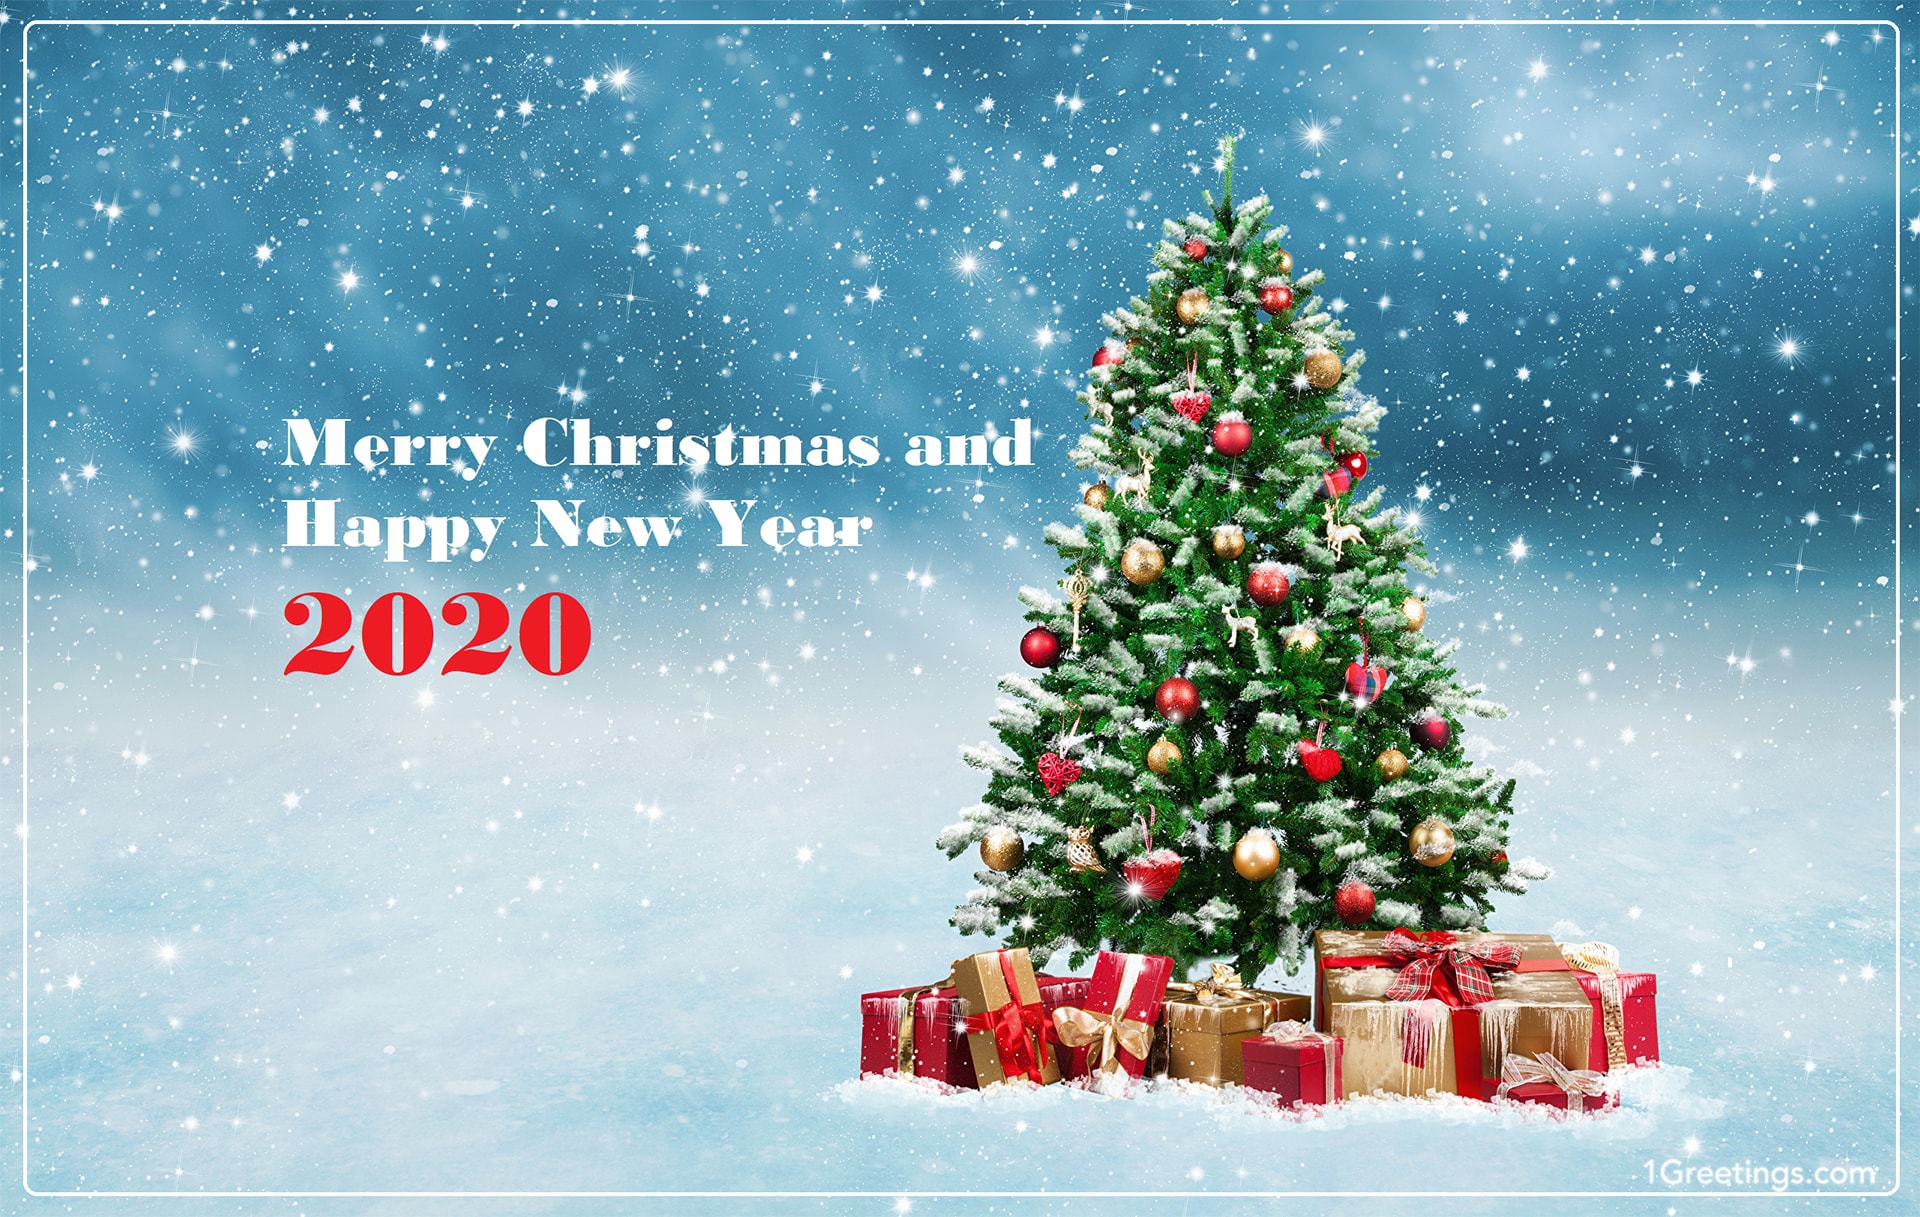 Merry Christmas Wallpaper Full HD Free Download - Images 5